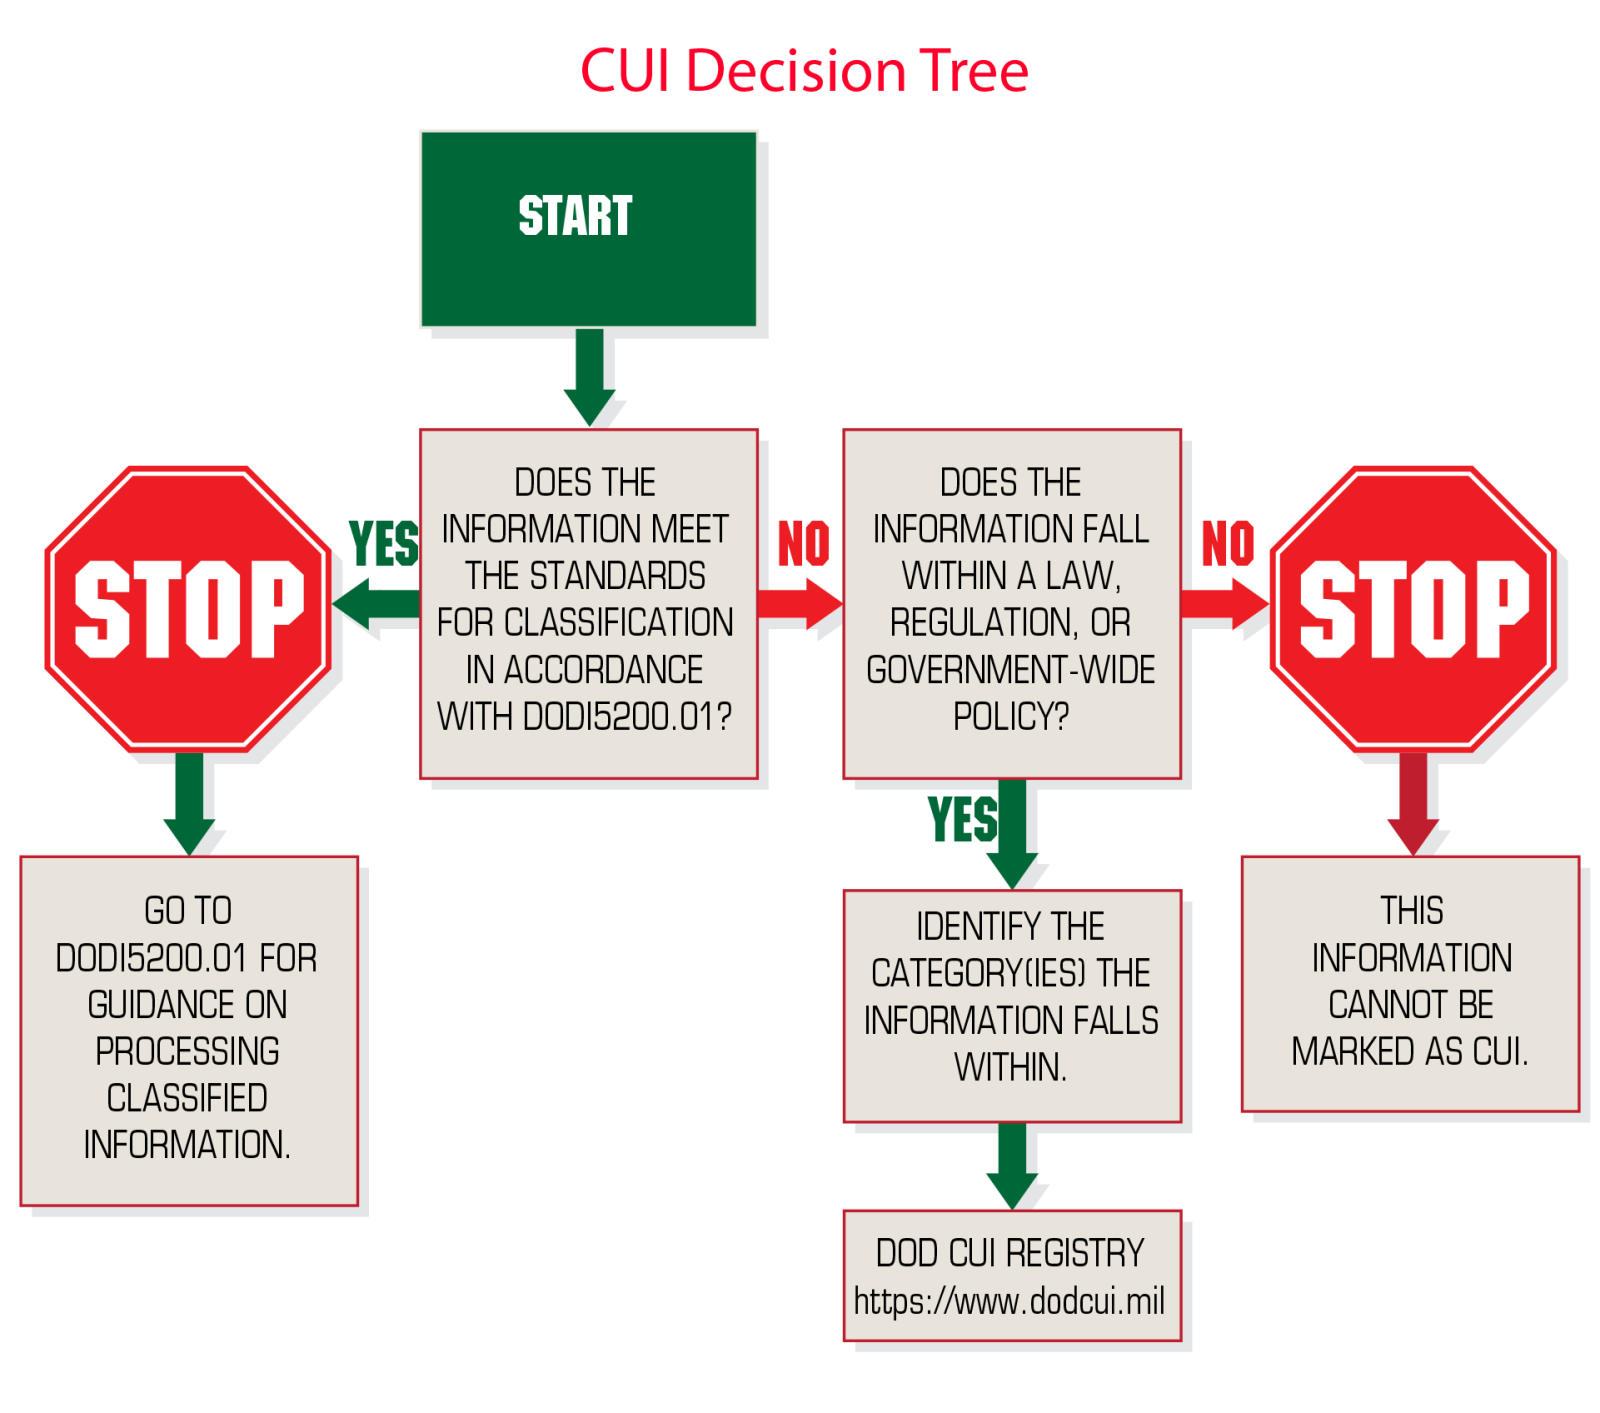 Research Security - CUI Decision Tree